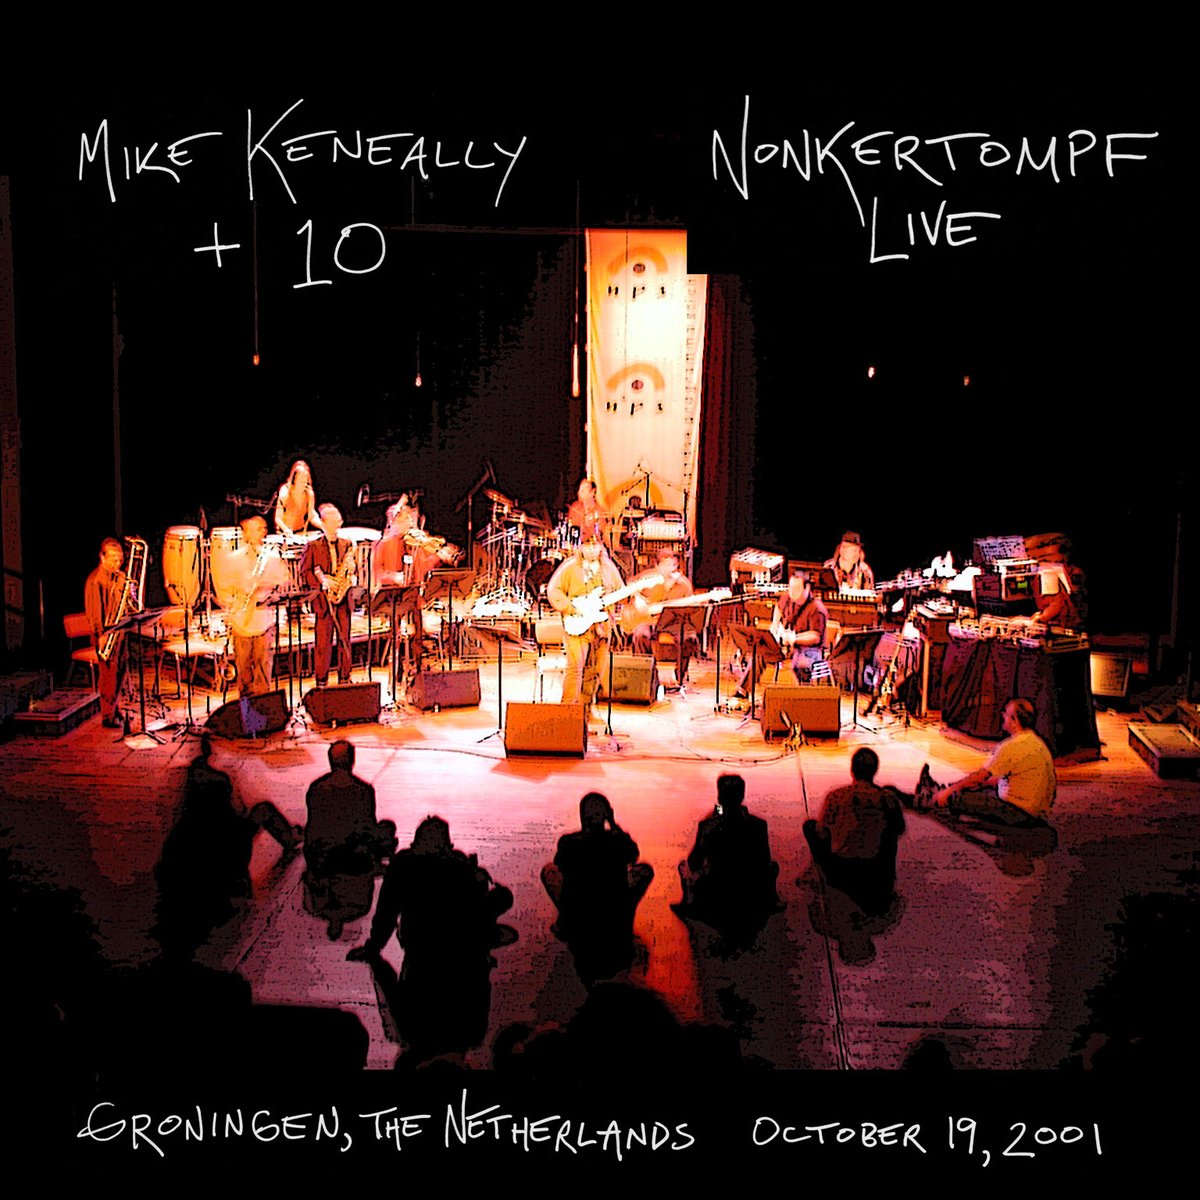 Today's Bandcamp Friday premiere is NONKERTOMPF LIVE, a document of a one-time-only festival performance with me and 10 others re-interpreting the music of Nonkertompf.

Edited/prepped for a 2003 radio convention, it now receives its commercial debut here: mikekeneallymusic.bandcamp.com/dashboard